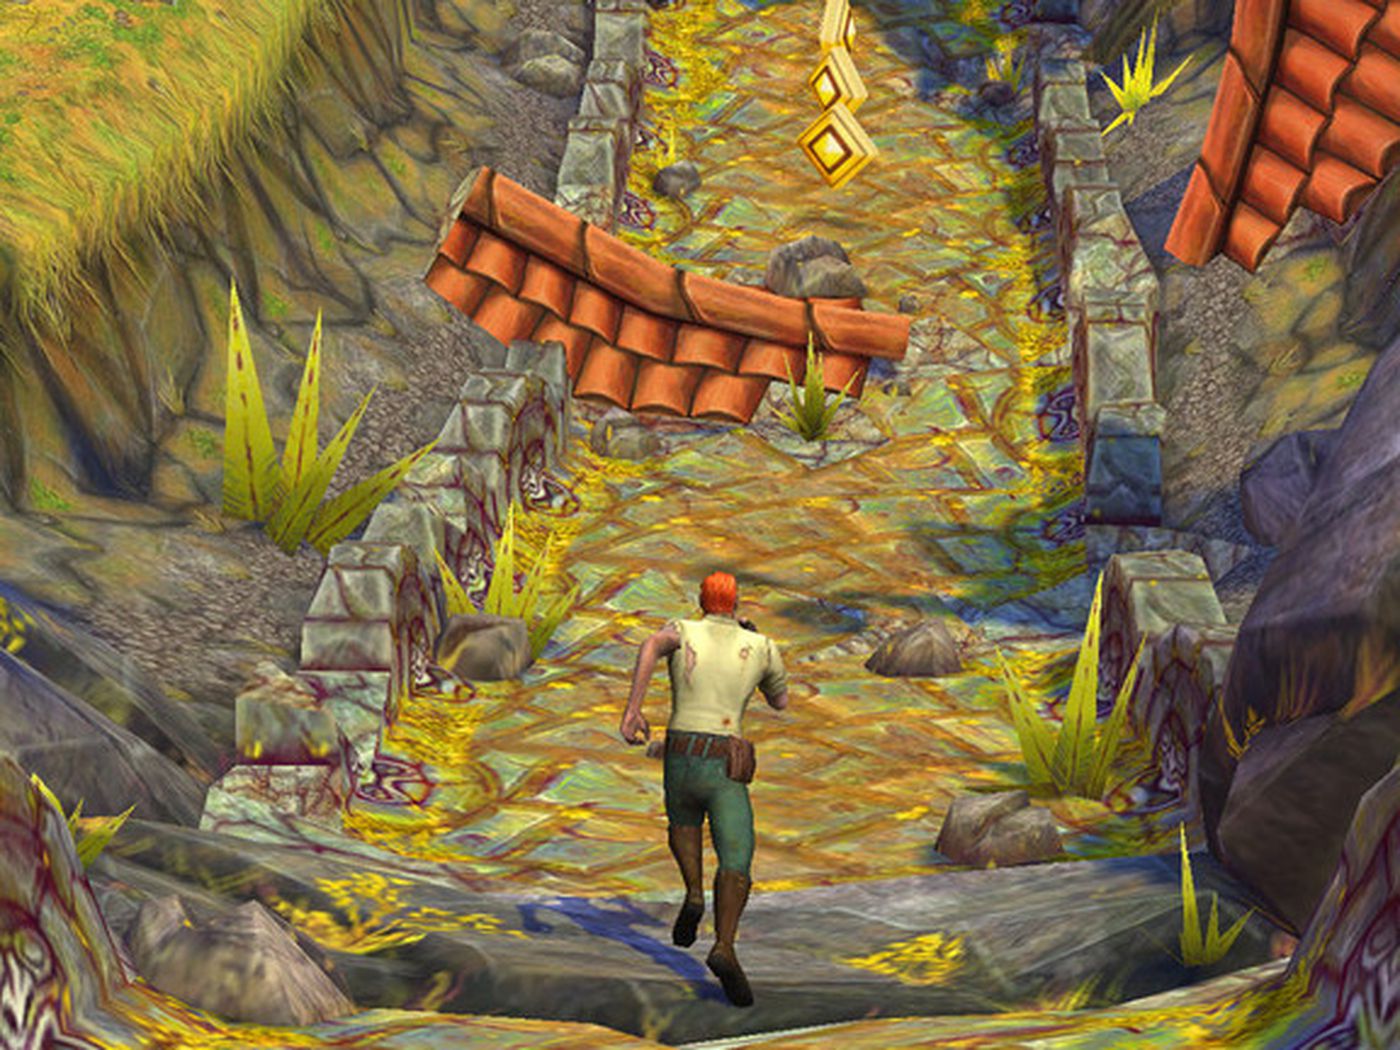 How to get Free Coins and Gems In Temple Run 2